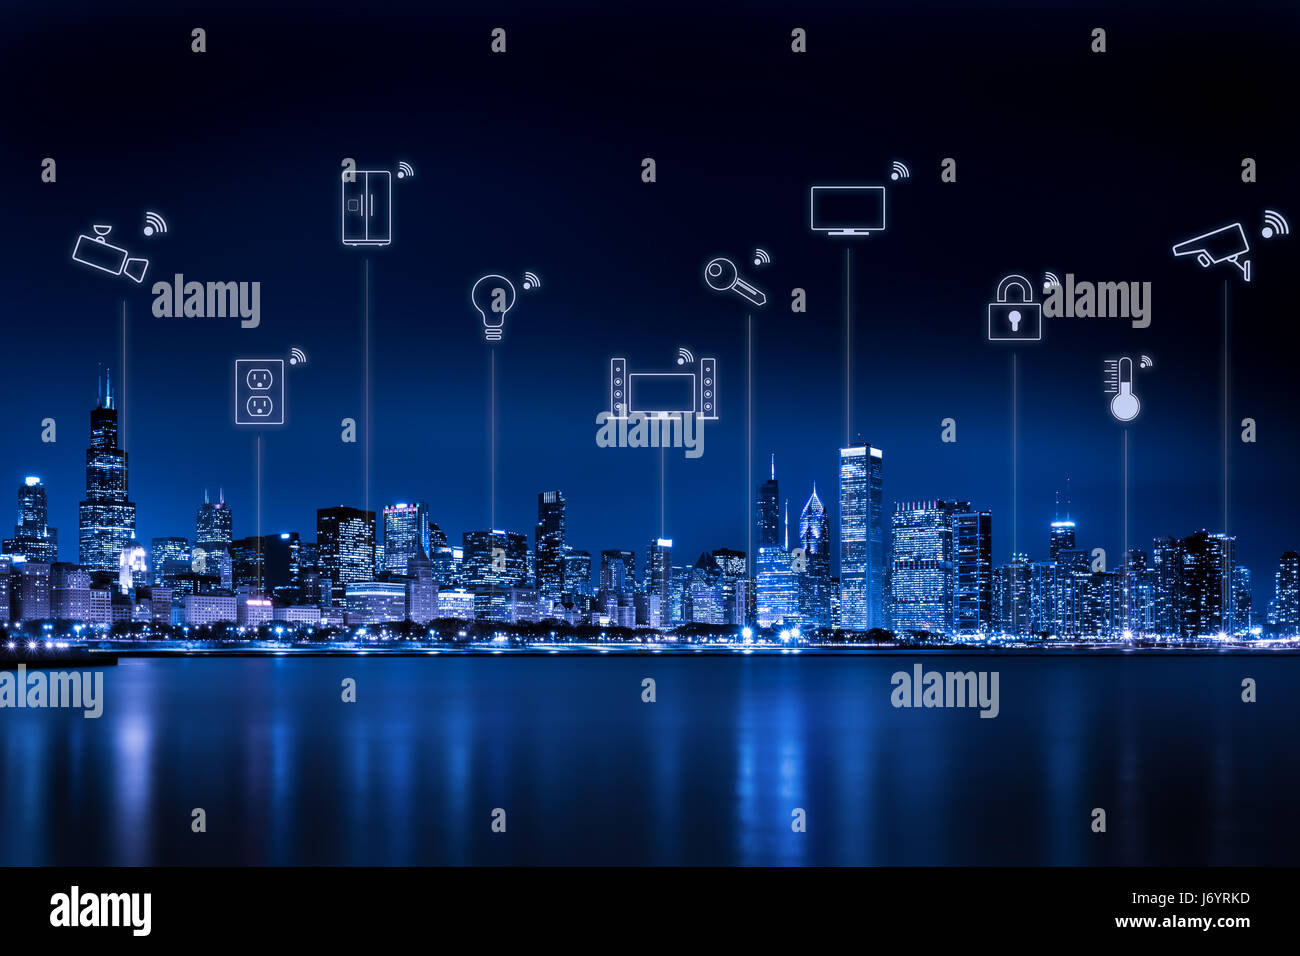 Chicago city skyline with internet of things Stock Photo